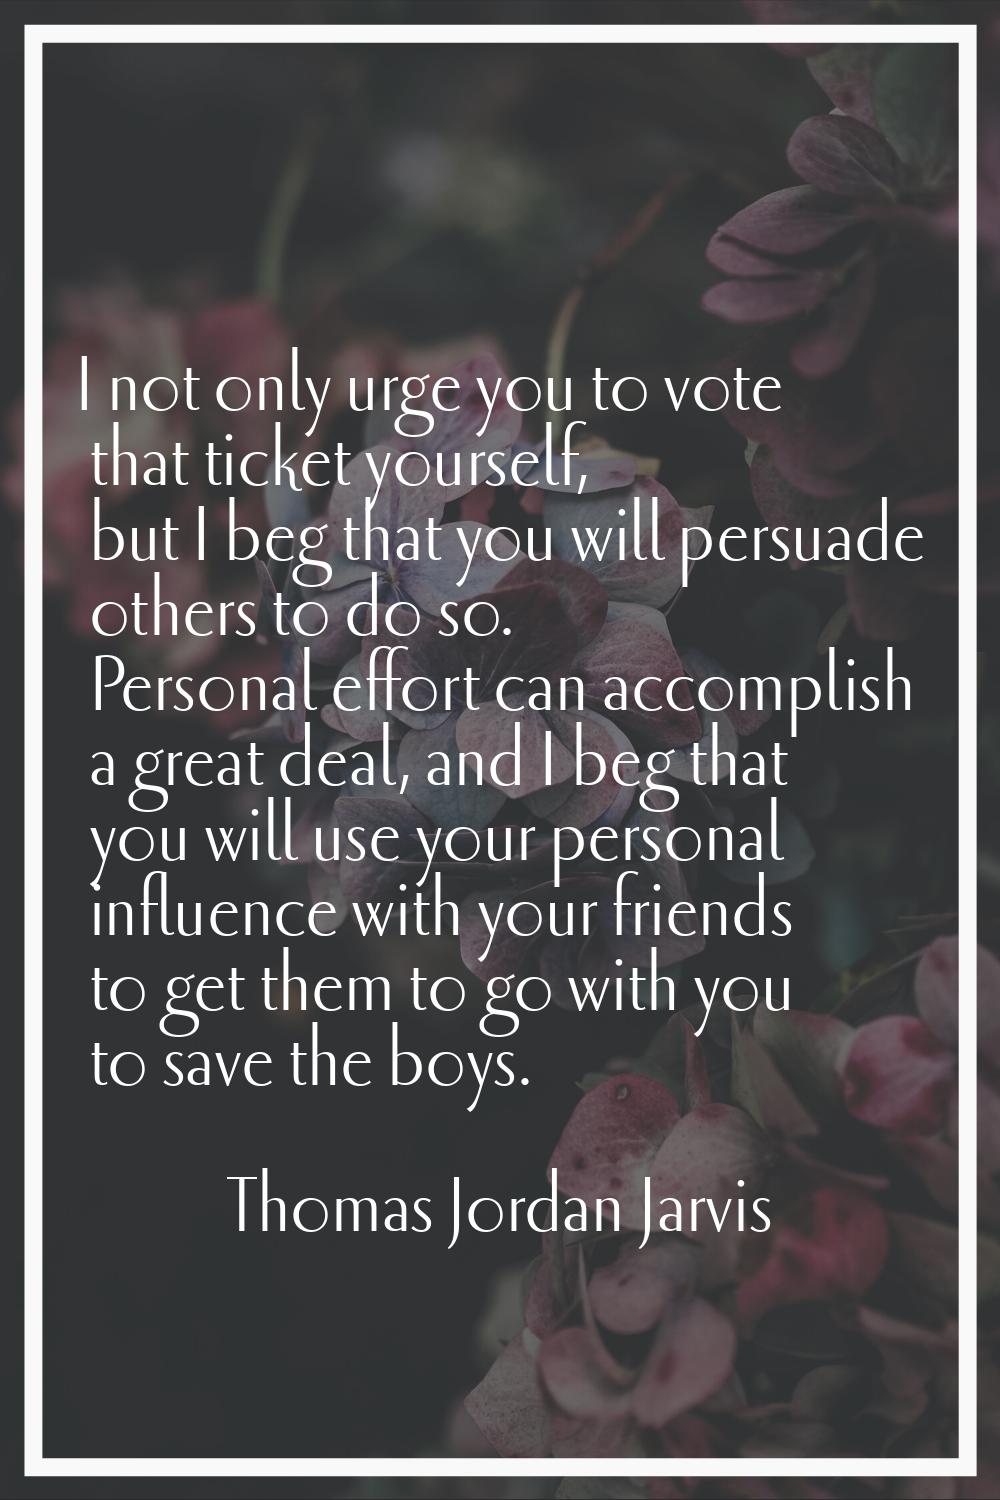 I not only urge you to vote that ticket yourself, but I beg that you will persuade others to do so.